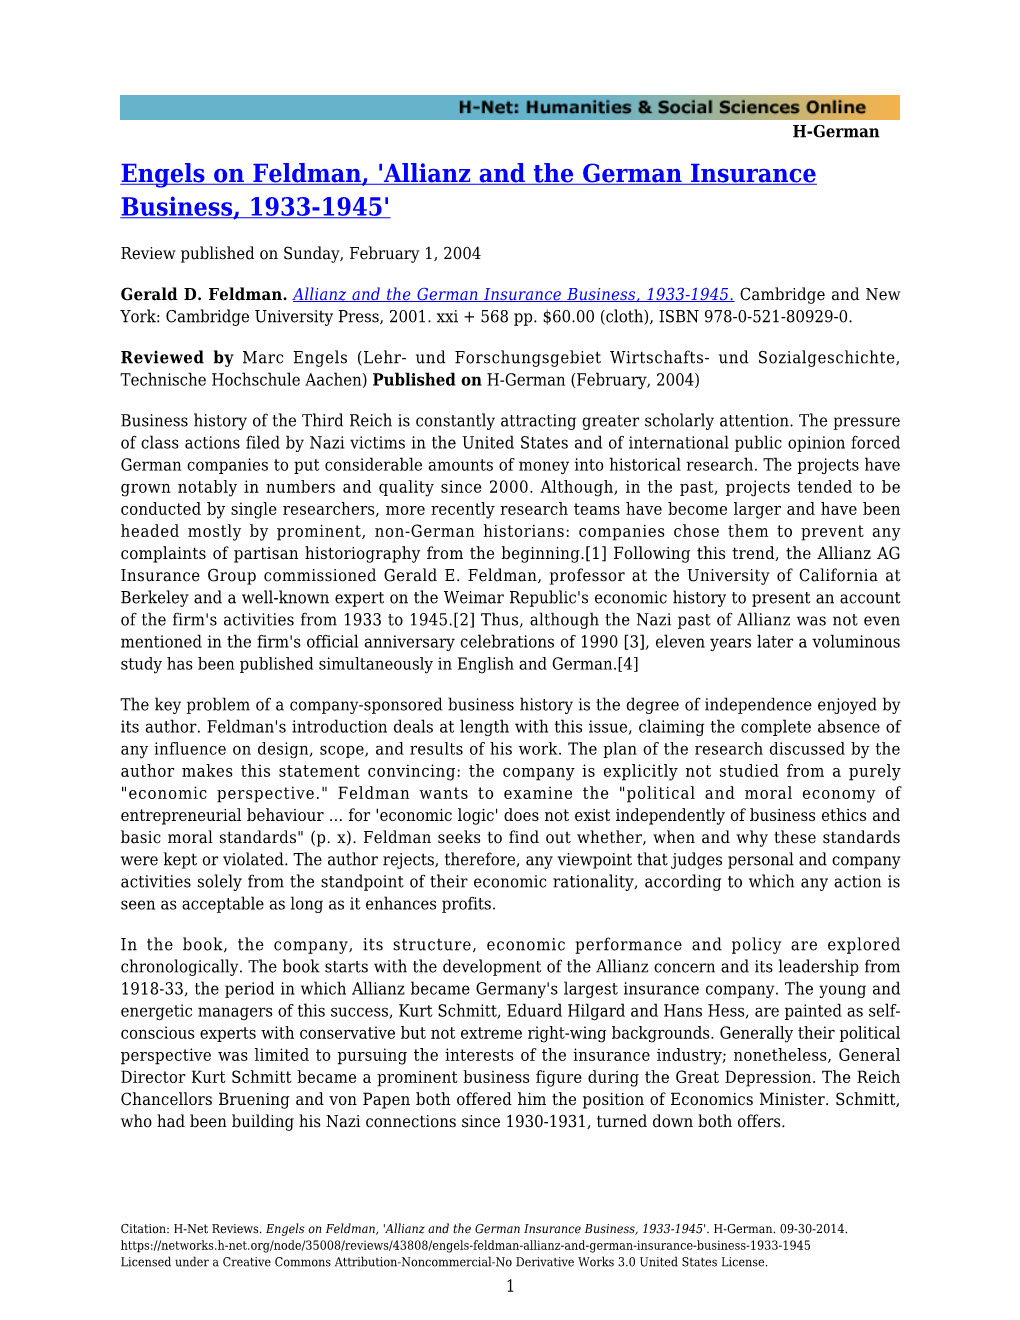 Allianz and the German Insurance Business, 1933-1945'